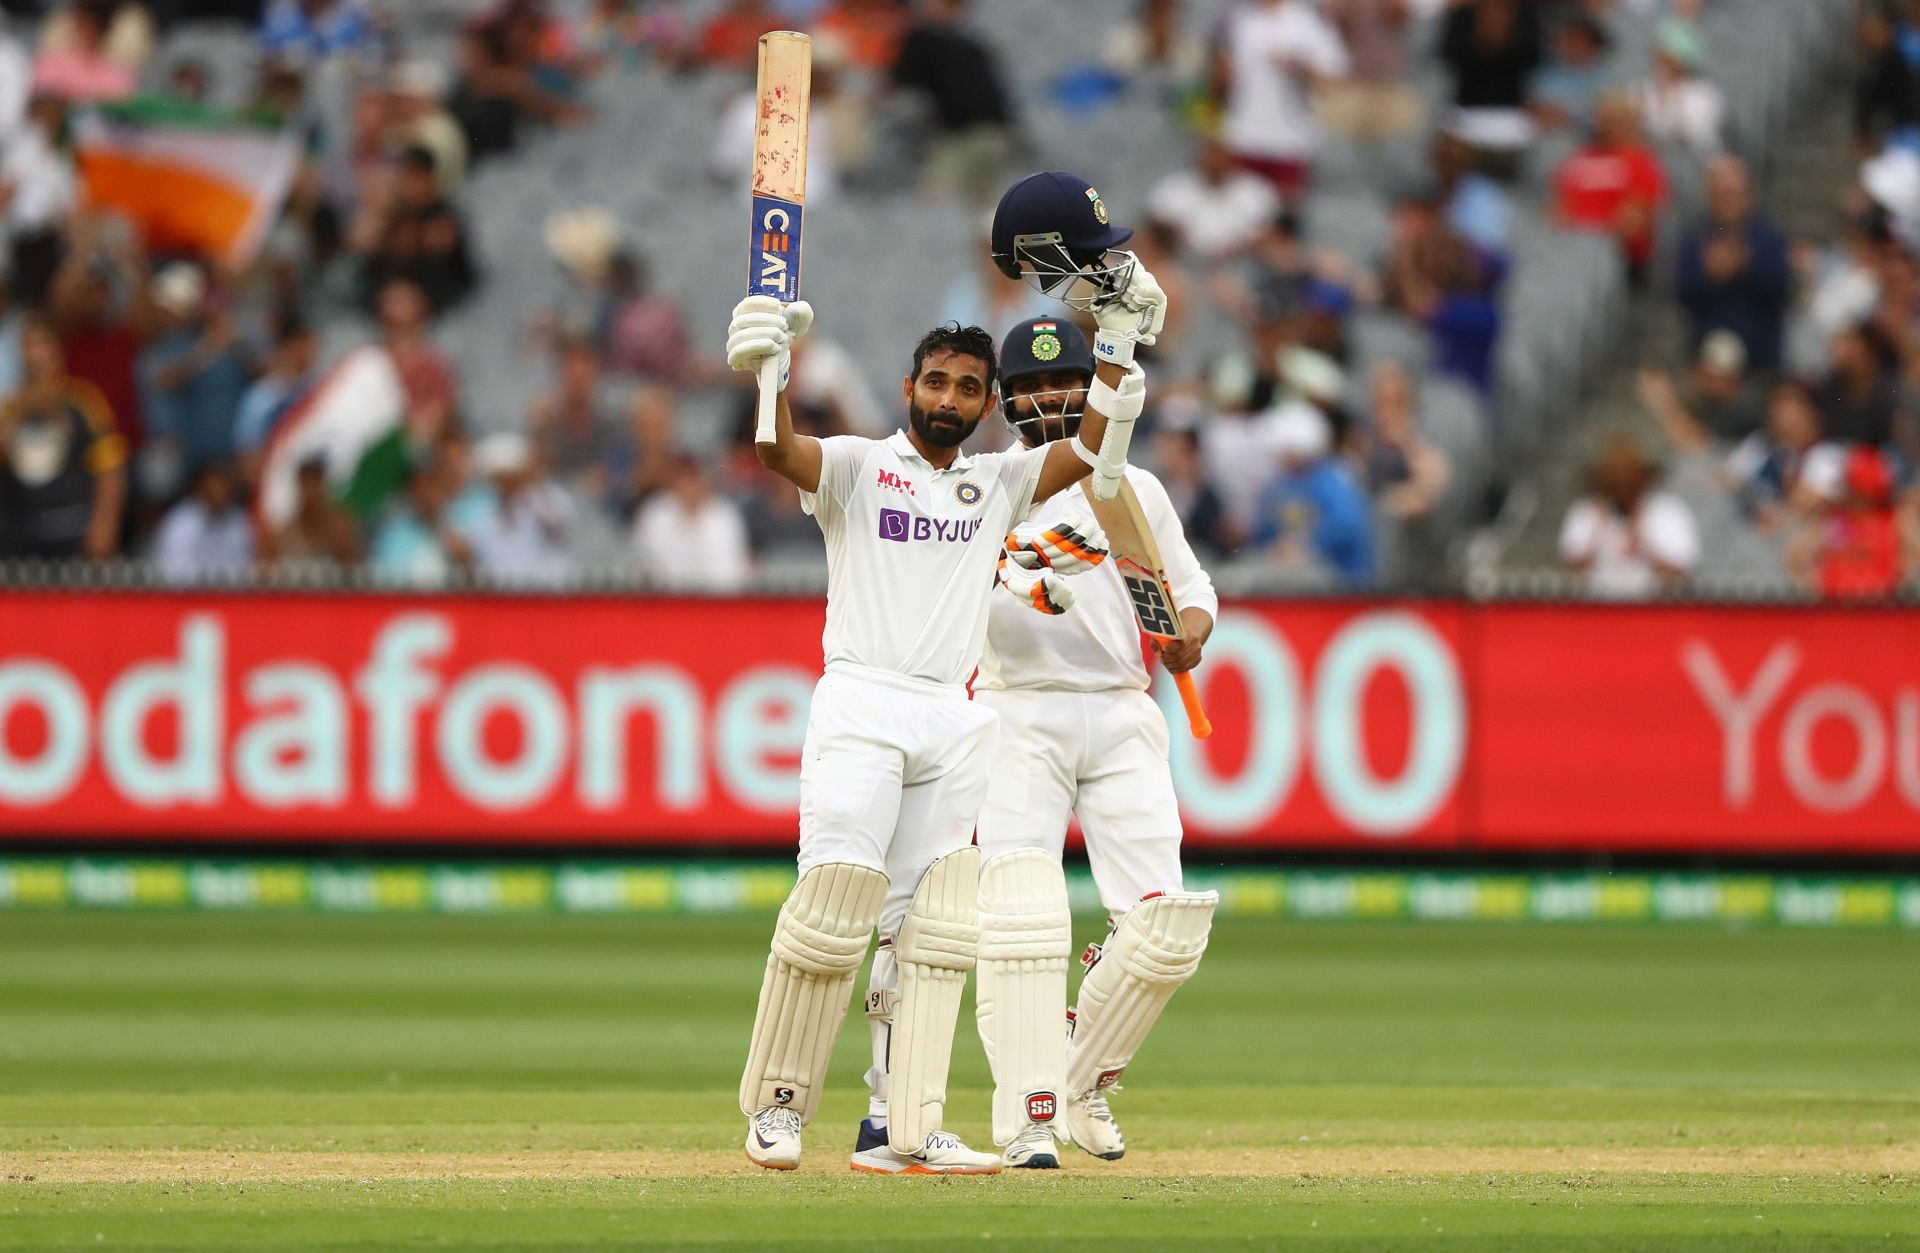 Rahane raises his bat after scoring a fighting century for India at the MCG in 2020.